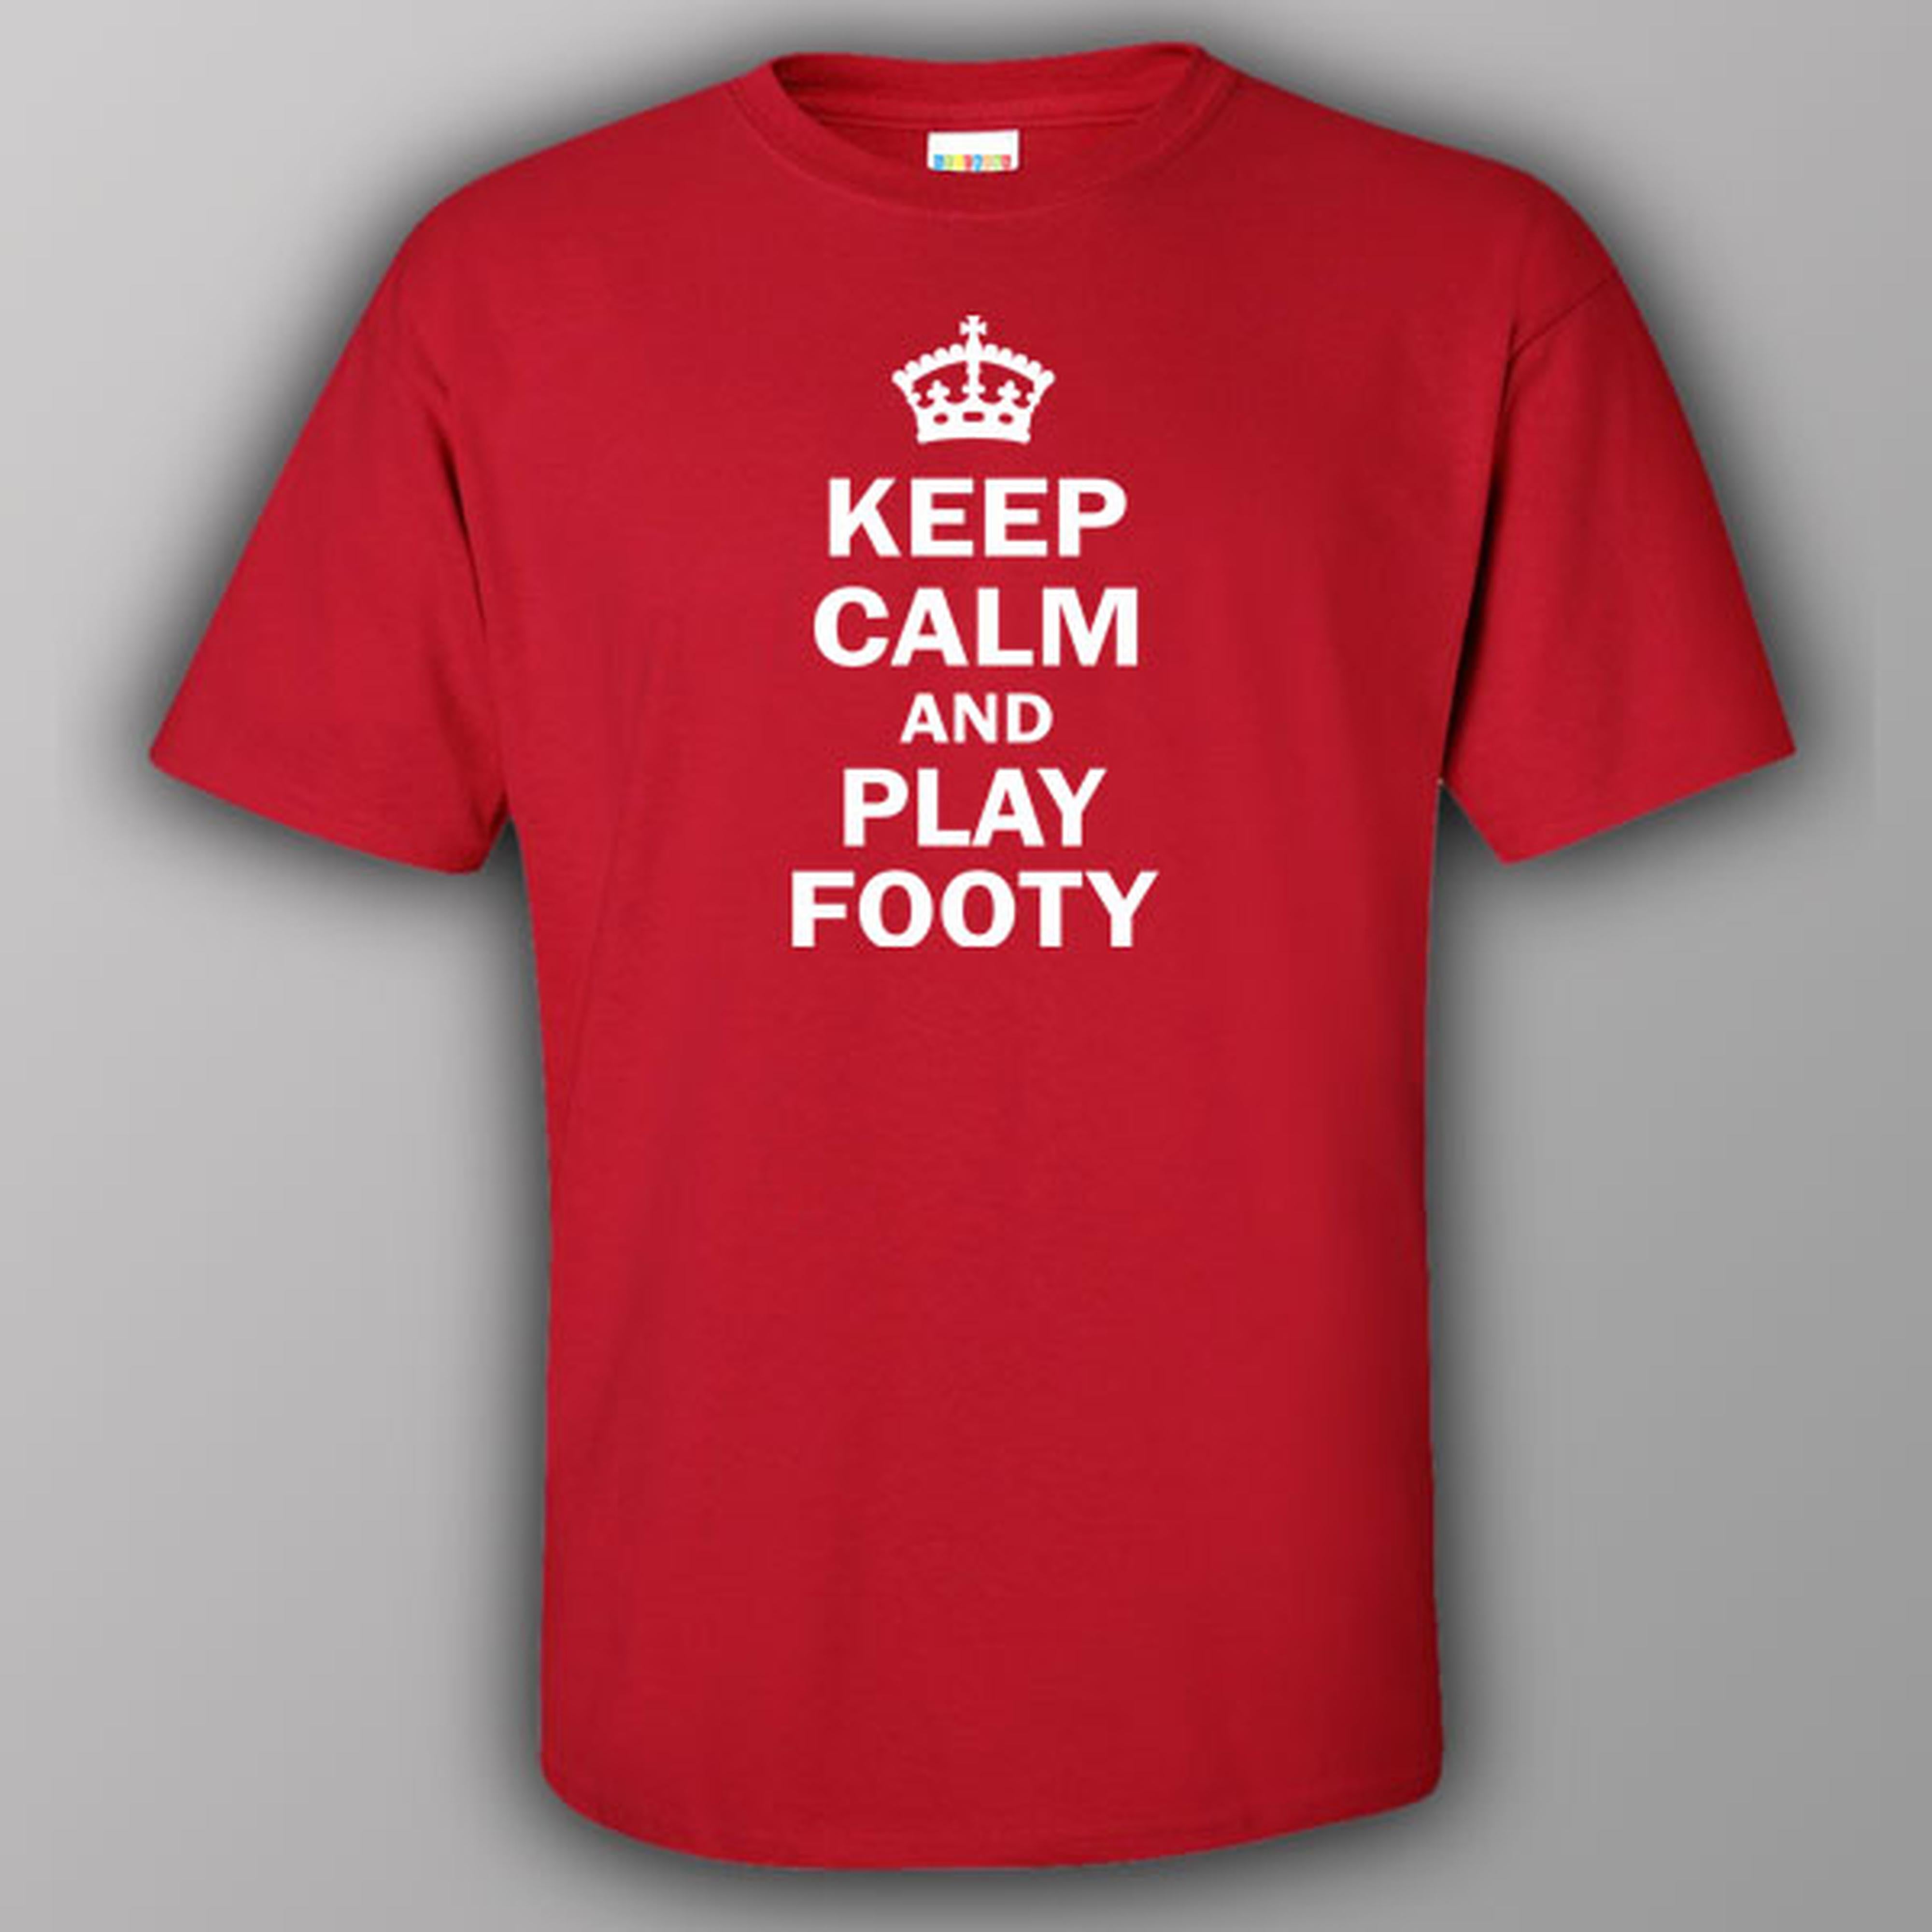 Keep calm and play footy - T-shirt